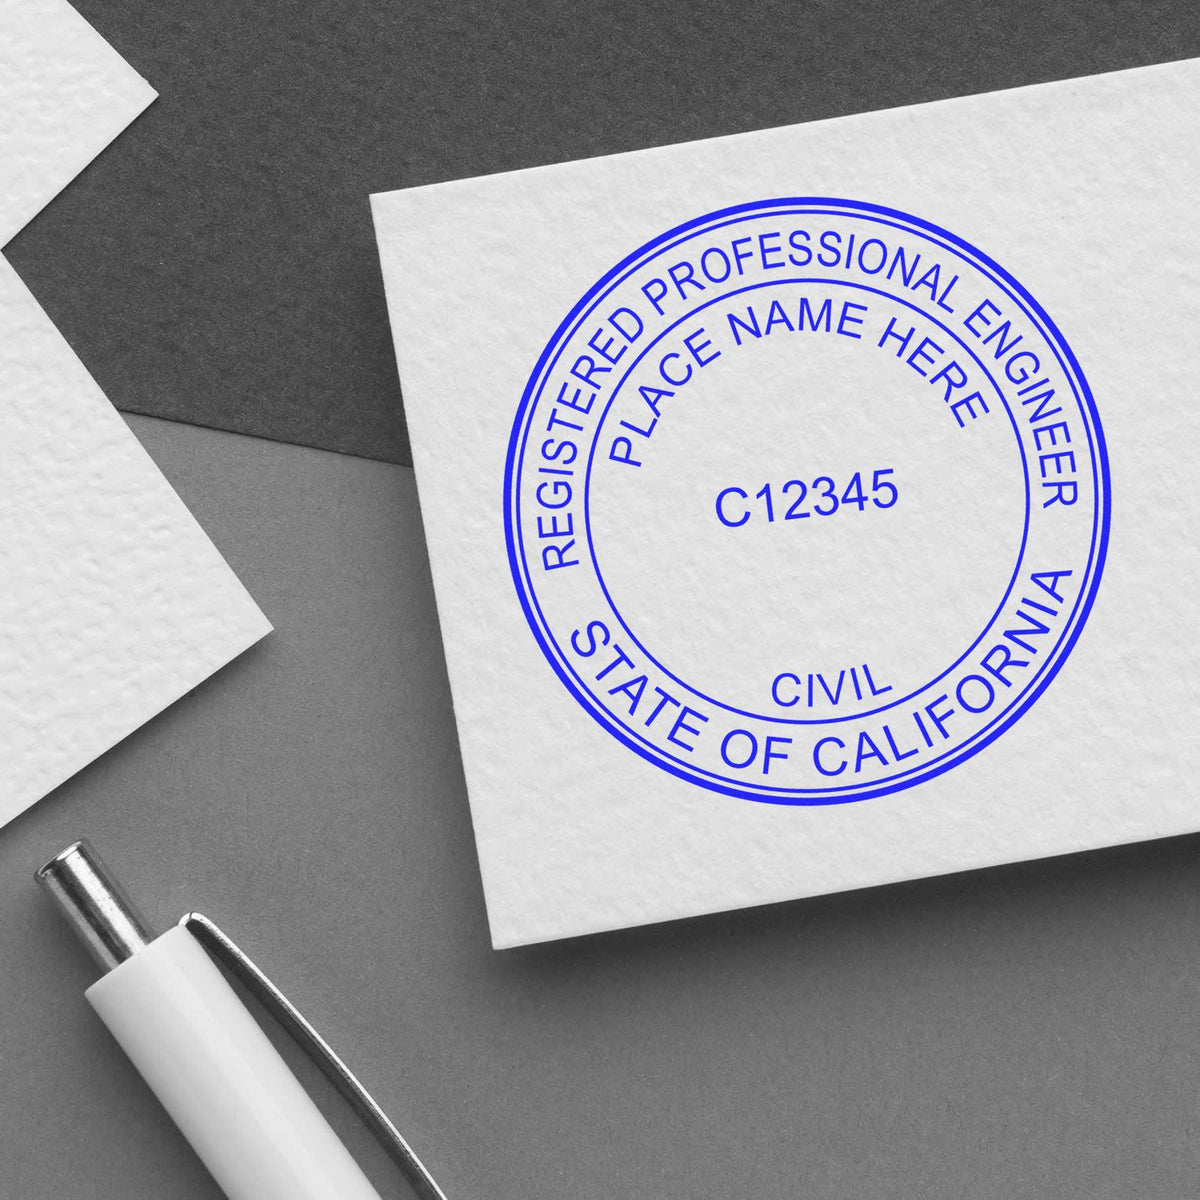 The Self-Inking California PE Stamp stamp impression comes to life with a crisp, detailed photo on paper - showcasing true professional quality.